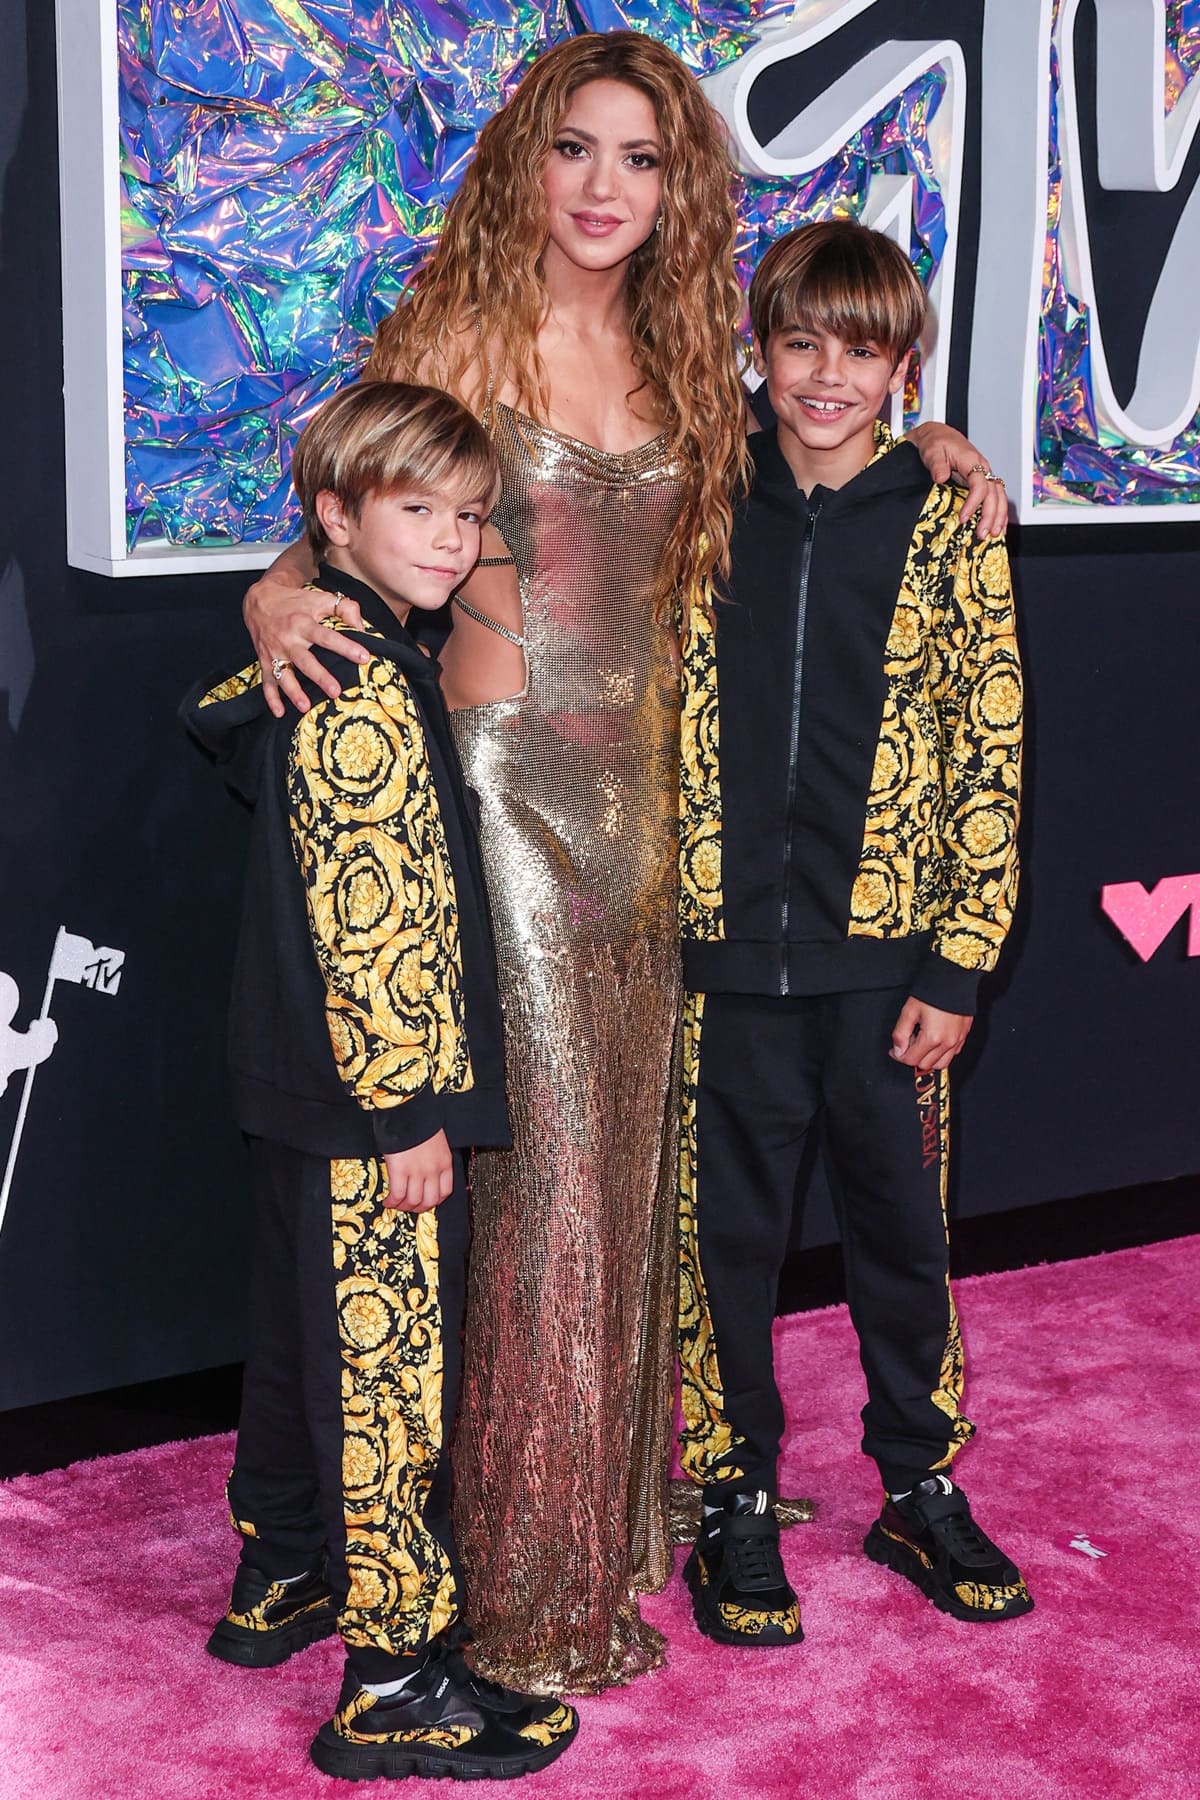 Shakira's two sons, Milan and Sasha, looked stylish and comfortable in their matching black-and-yellow Versace sweatsuits